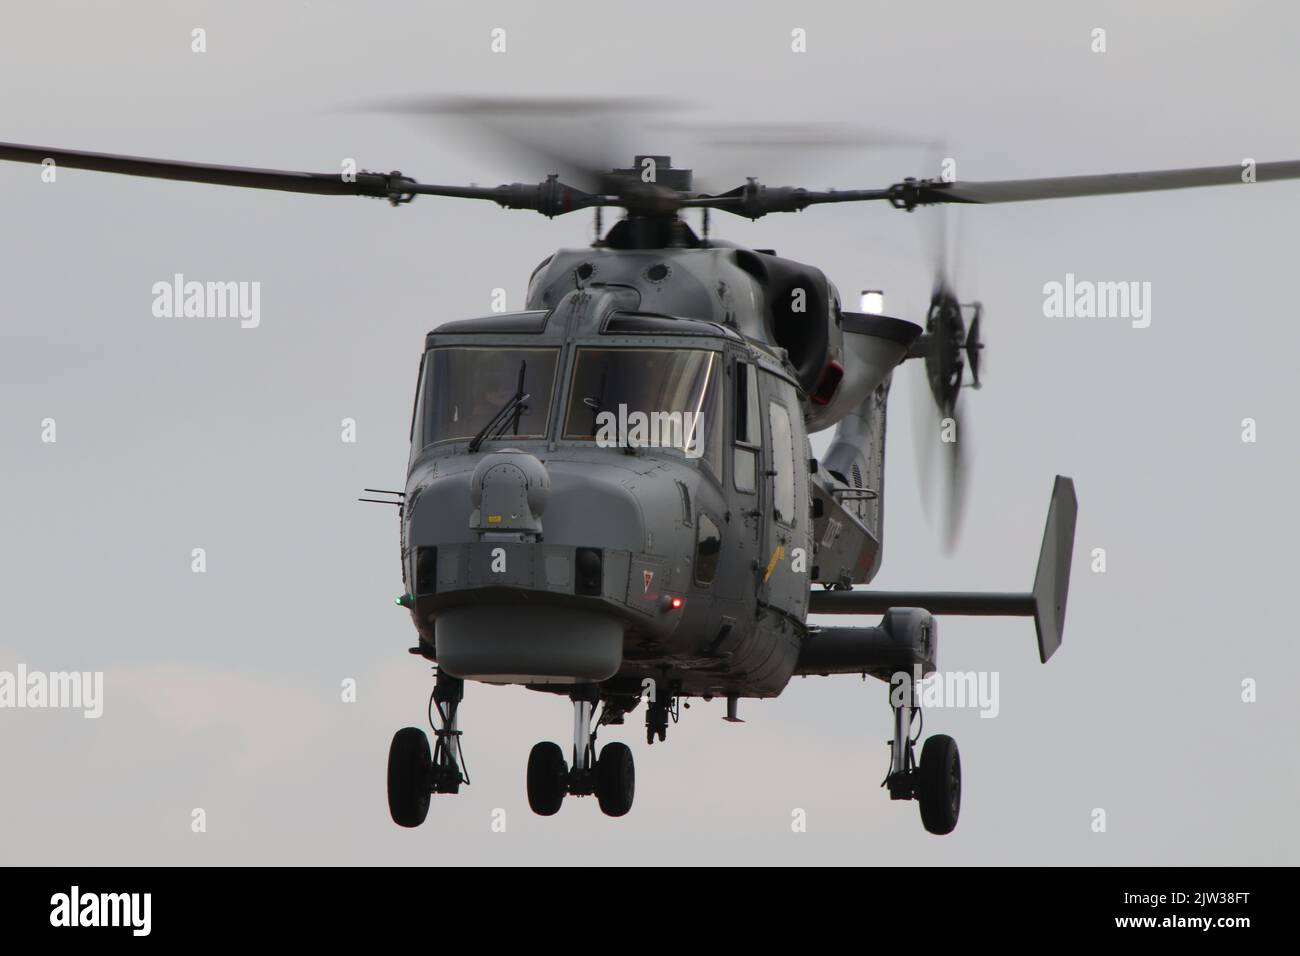 ZZ377, an AgustaWestland Wildcat HMA2 operated by the Royal Navy, arriving at RAF Fairford in Gloucestershire, England, to participate in the Royal International Air Tattoo 2022 (RIAT 2022). Stock Photo